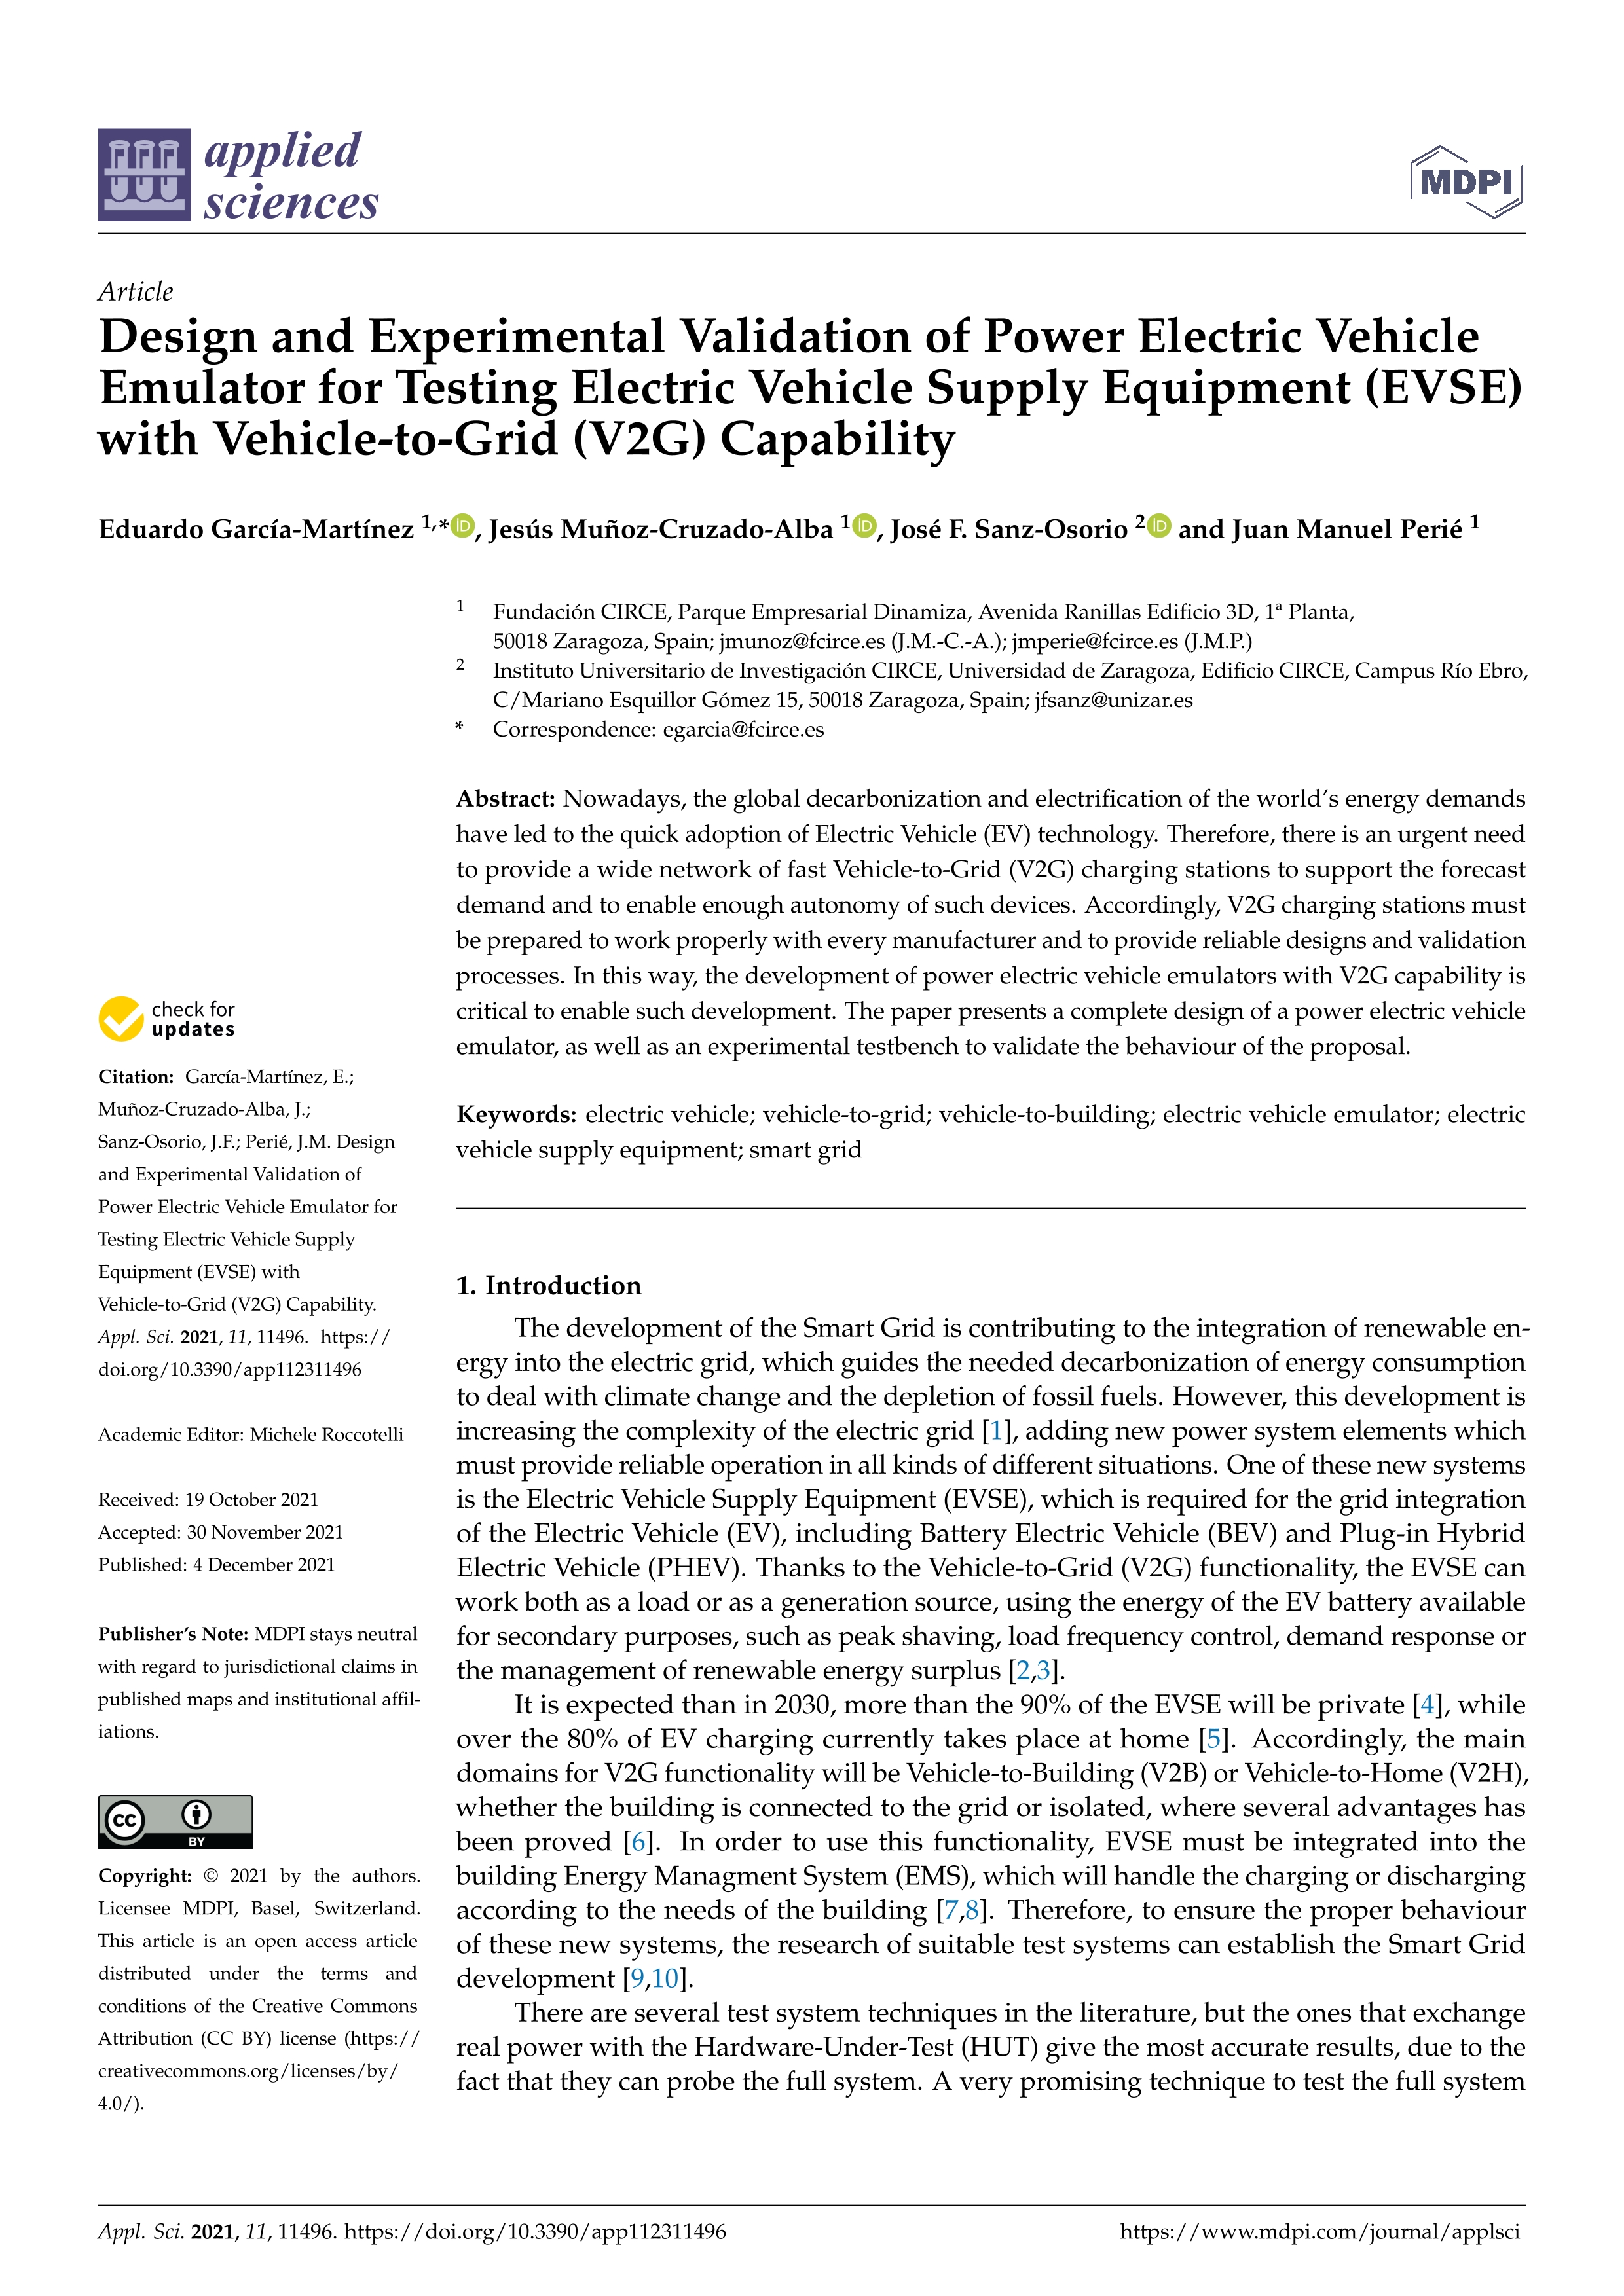 Design and Experimental Validation of Power Electric Vehicle Emulator for Testing Electric Vehicle Supply Equipment (EVSE) with Vehicle-to-Grid (V2G) Capability